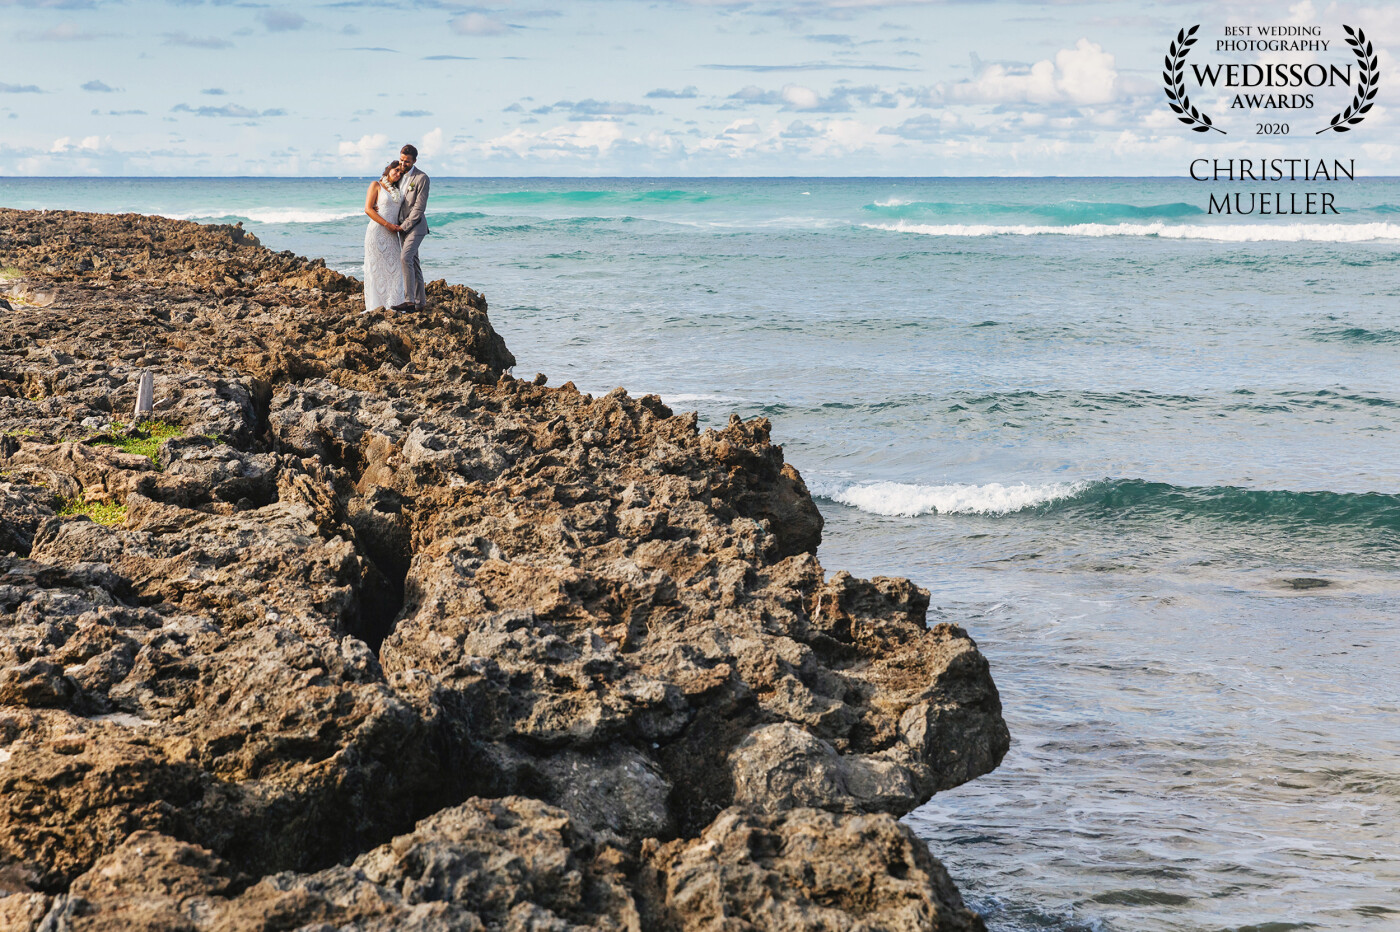 It was such a great experience with this cute couple at this amazing destination in Oahu, Hawaii. We did the couple shoot in Kawela Bay Beach Park. There were countless views of great photos. I particularly like the structures of this rocky stretch of coast.